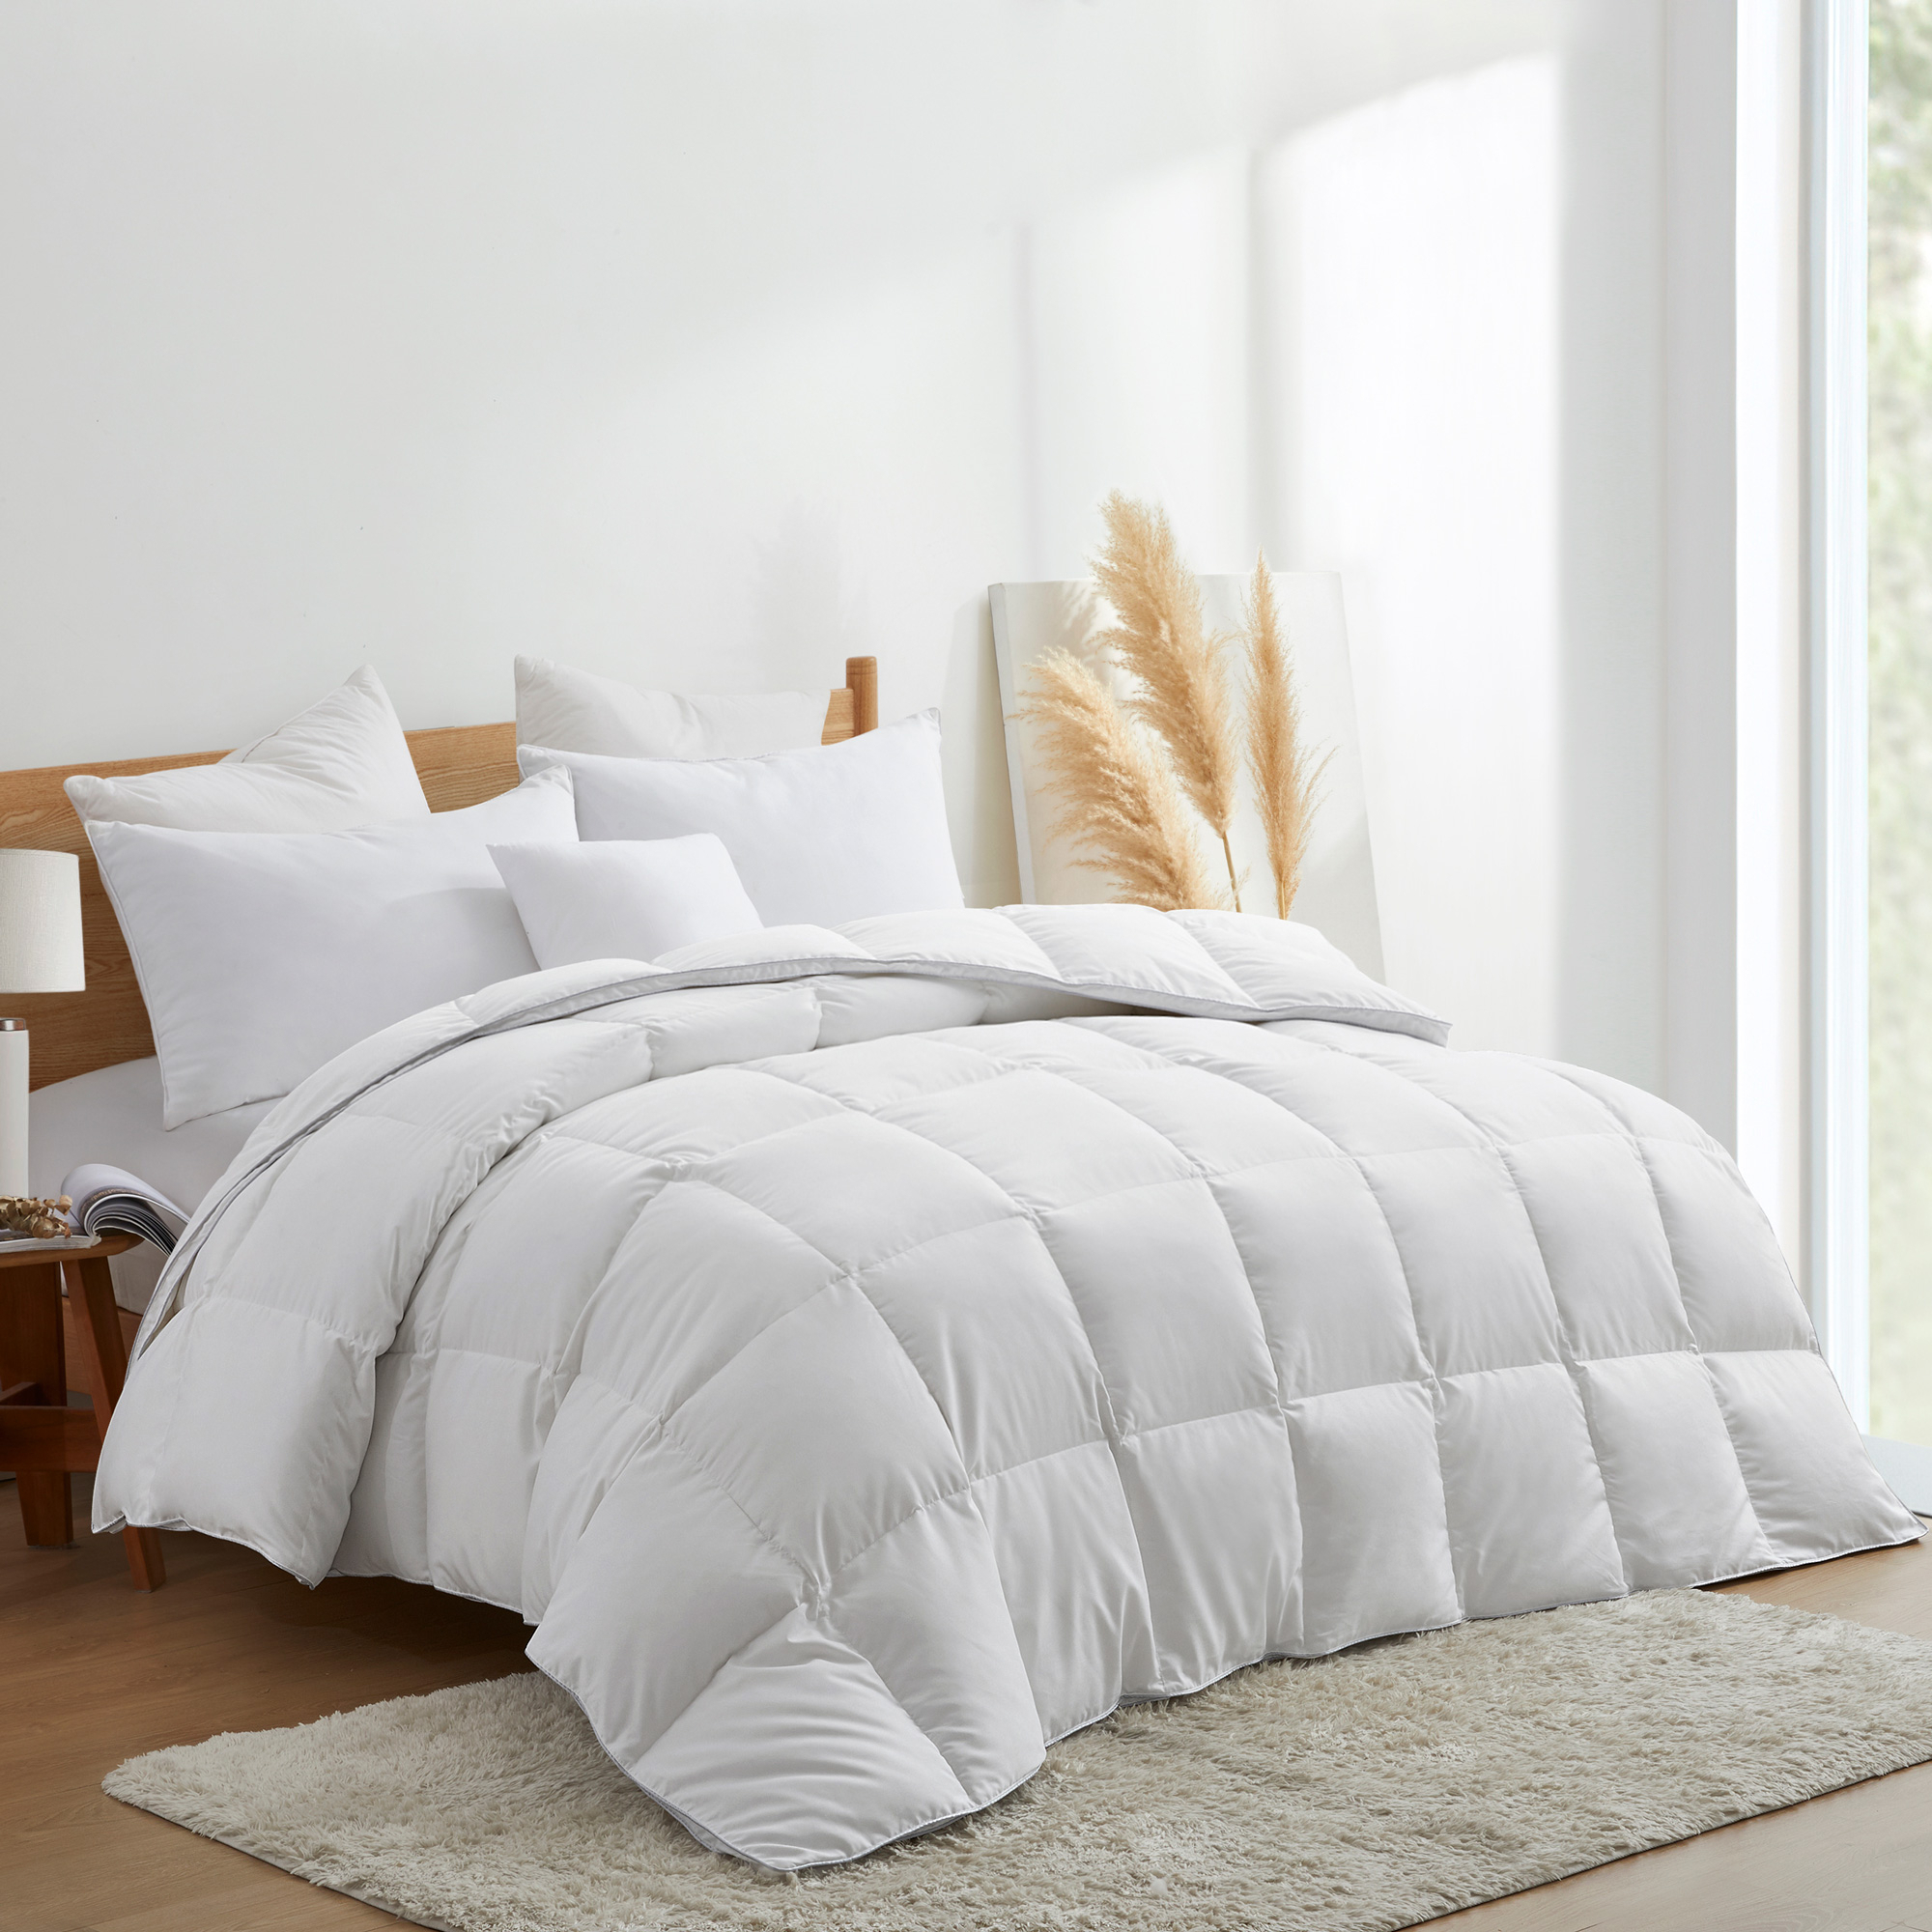 Luxurious Medium Weight White Goose Down Feathers Fiber Comforter, For All-Season Weather - Twin